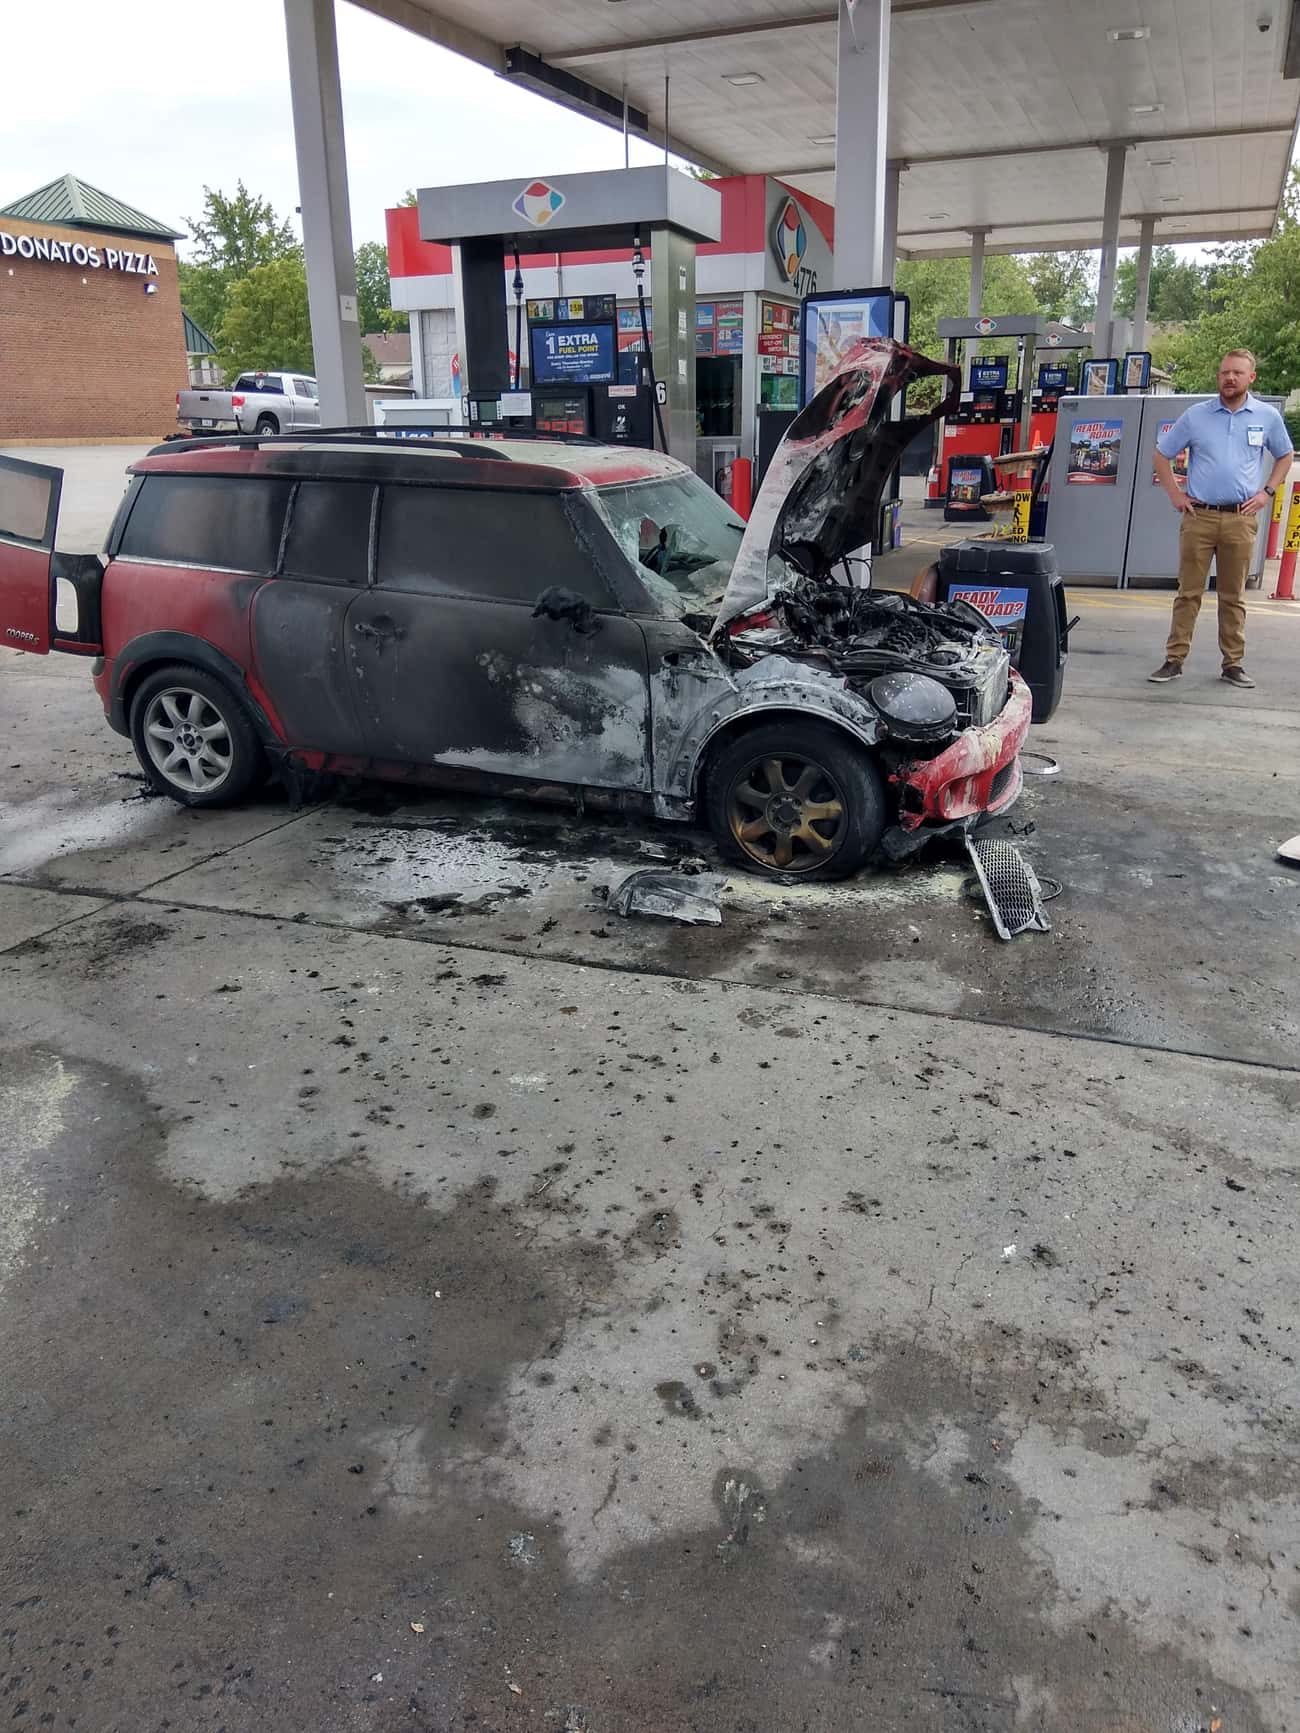 "Picked My Car Up From The Mechanic Yesterday After Having A Bunch Of Things Replaced Totaling $2100 Just To Have Burst Into Flames On Me This Morning."